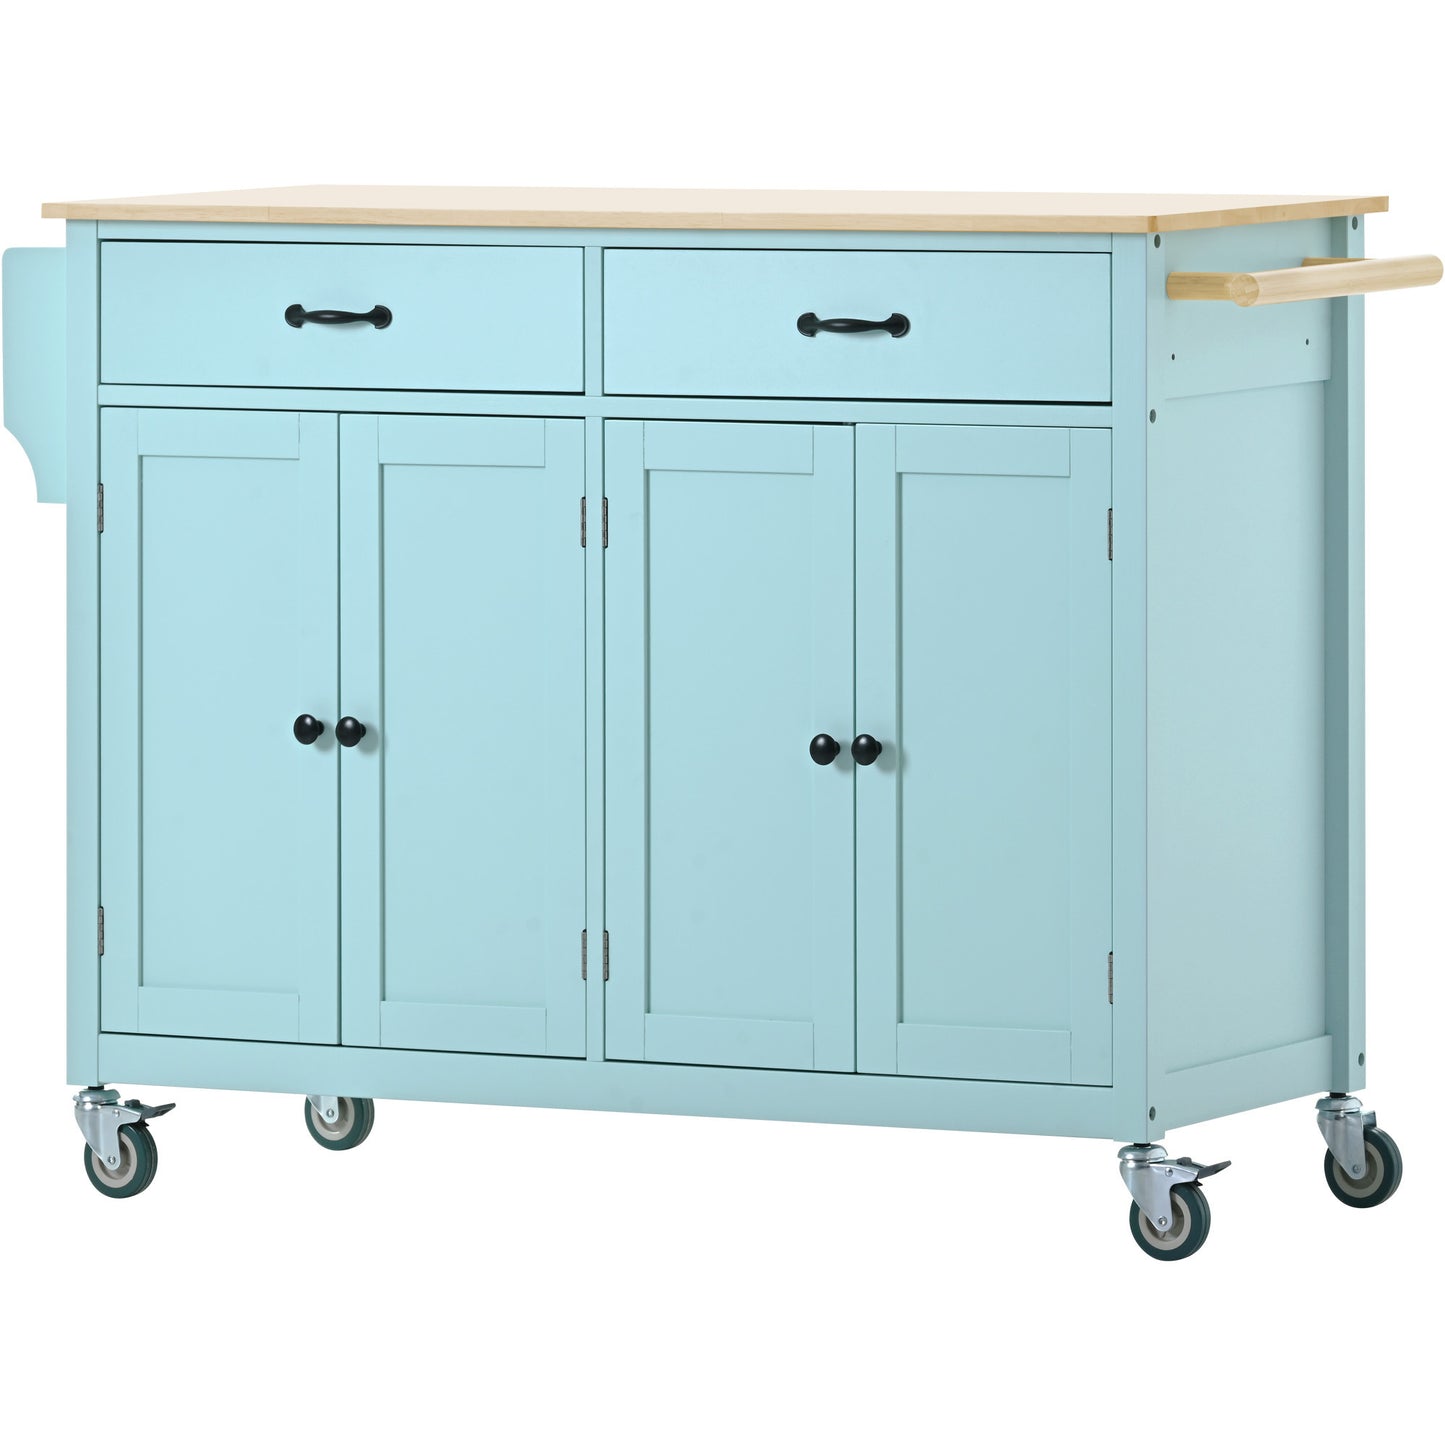 Kitchen Island Cart with 4 Door Cabinet and Two Drawers and 2 Locking Wheels - Solid Wood Top, Adjustable Shelves, Spice & Towel Rack(Mint Green)